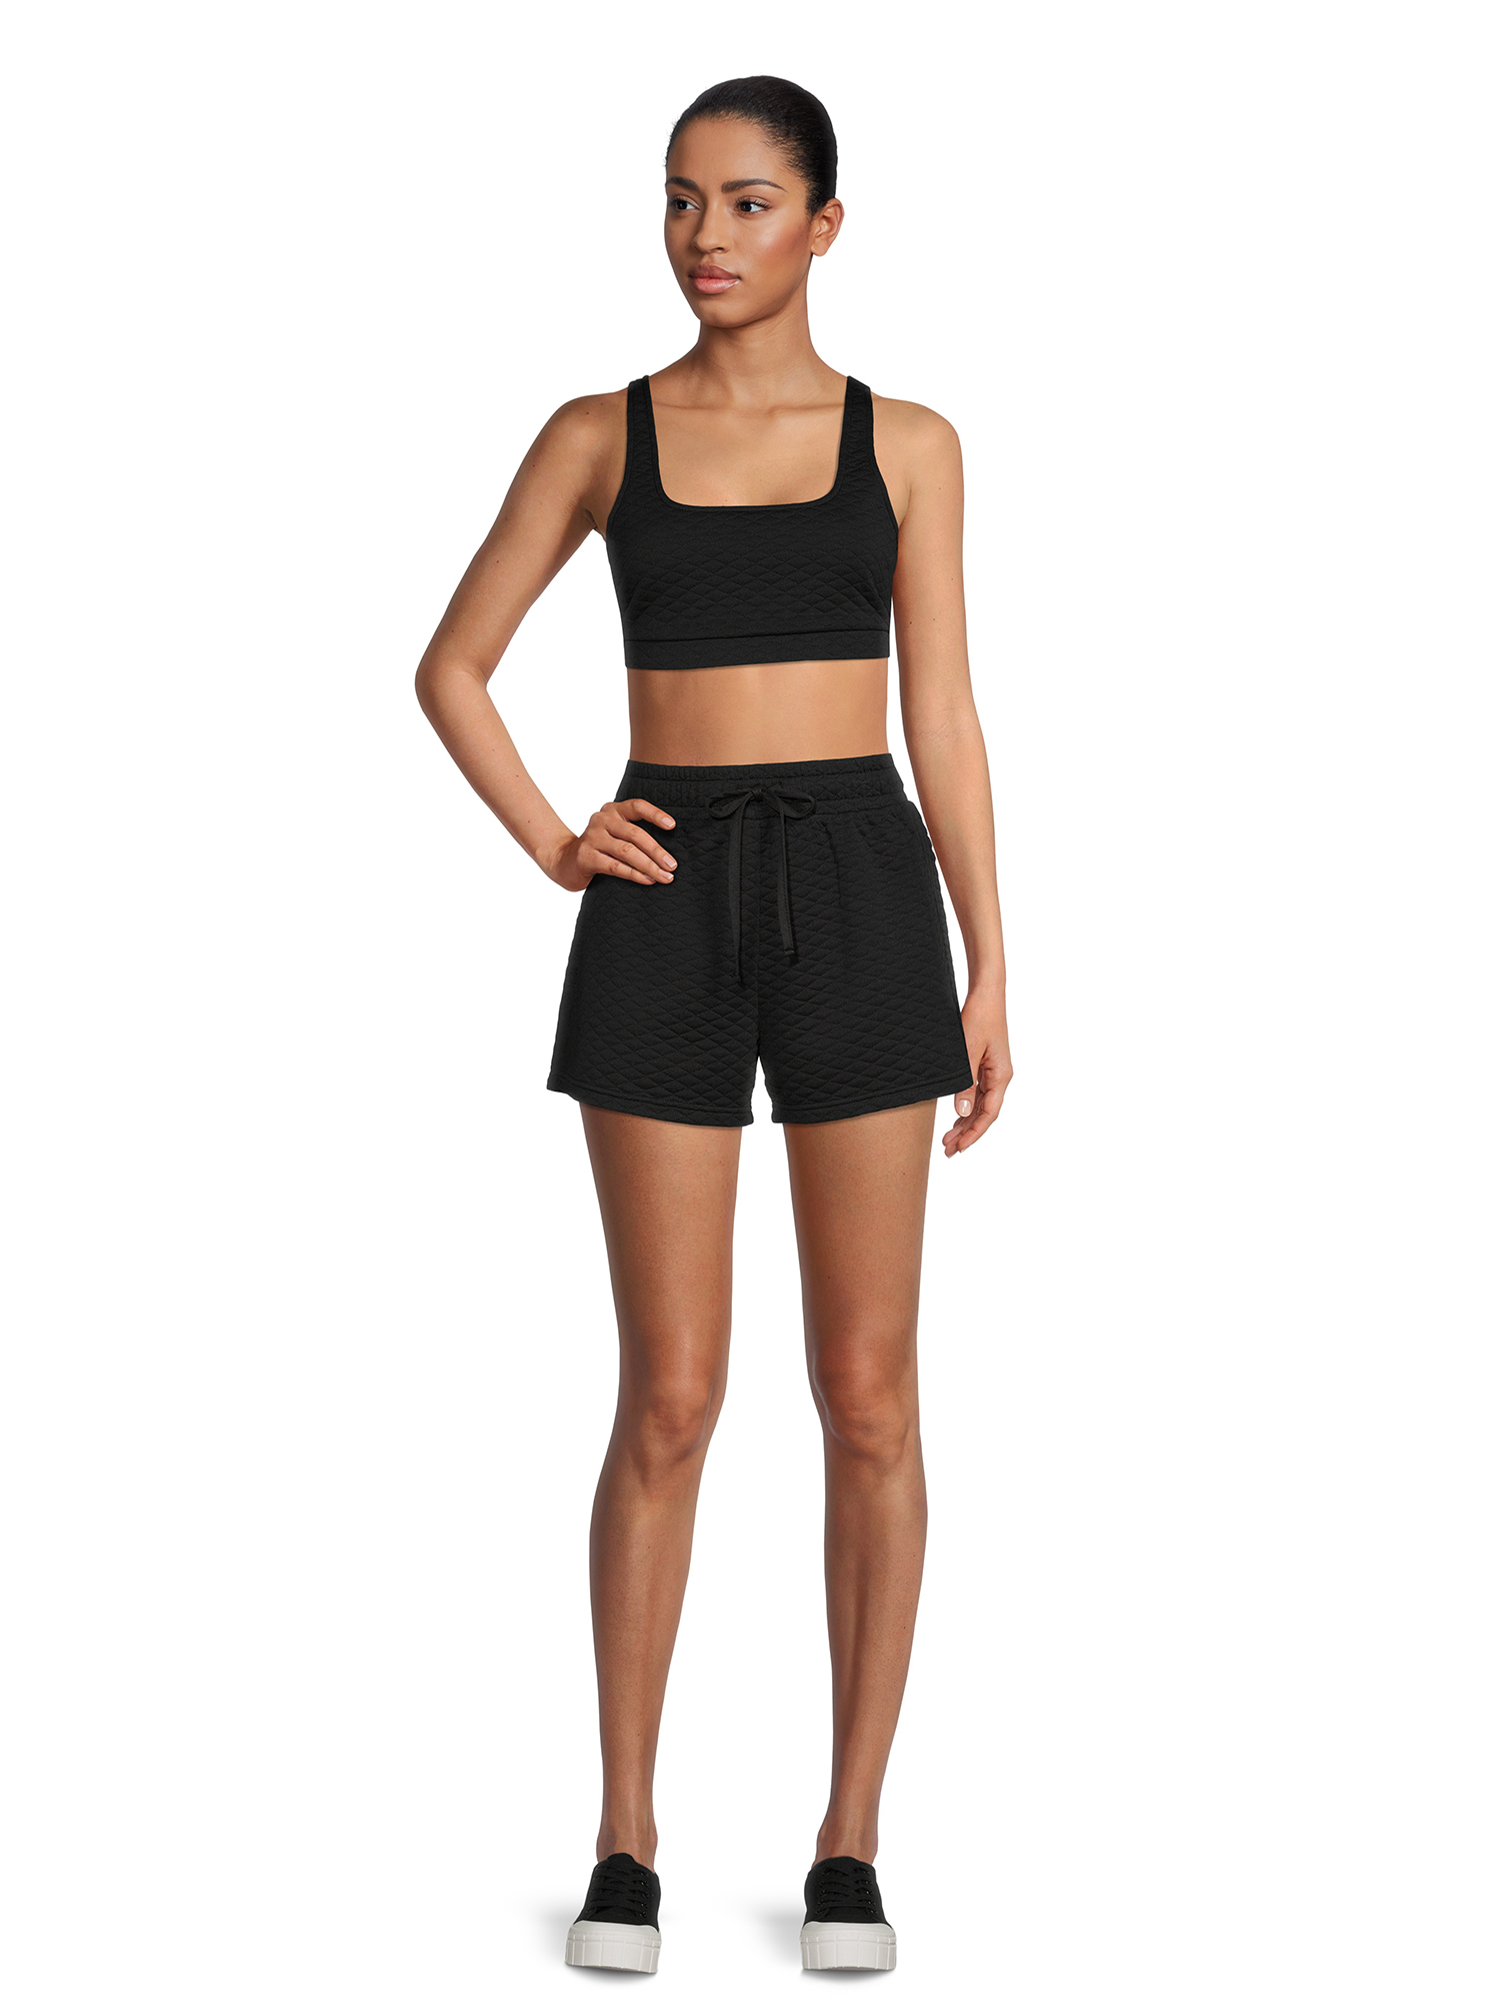 No Boundaries Juniors Quilted Crop Top and Shorts Set, 2-Piece - image 2 of 5